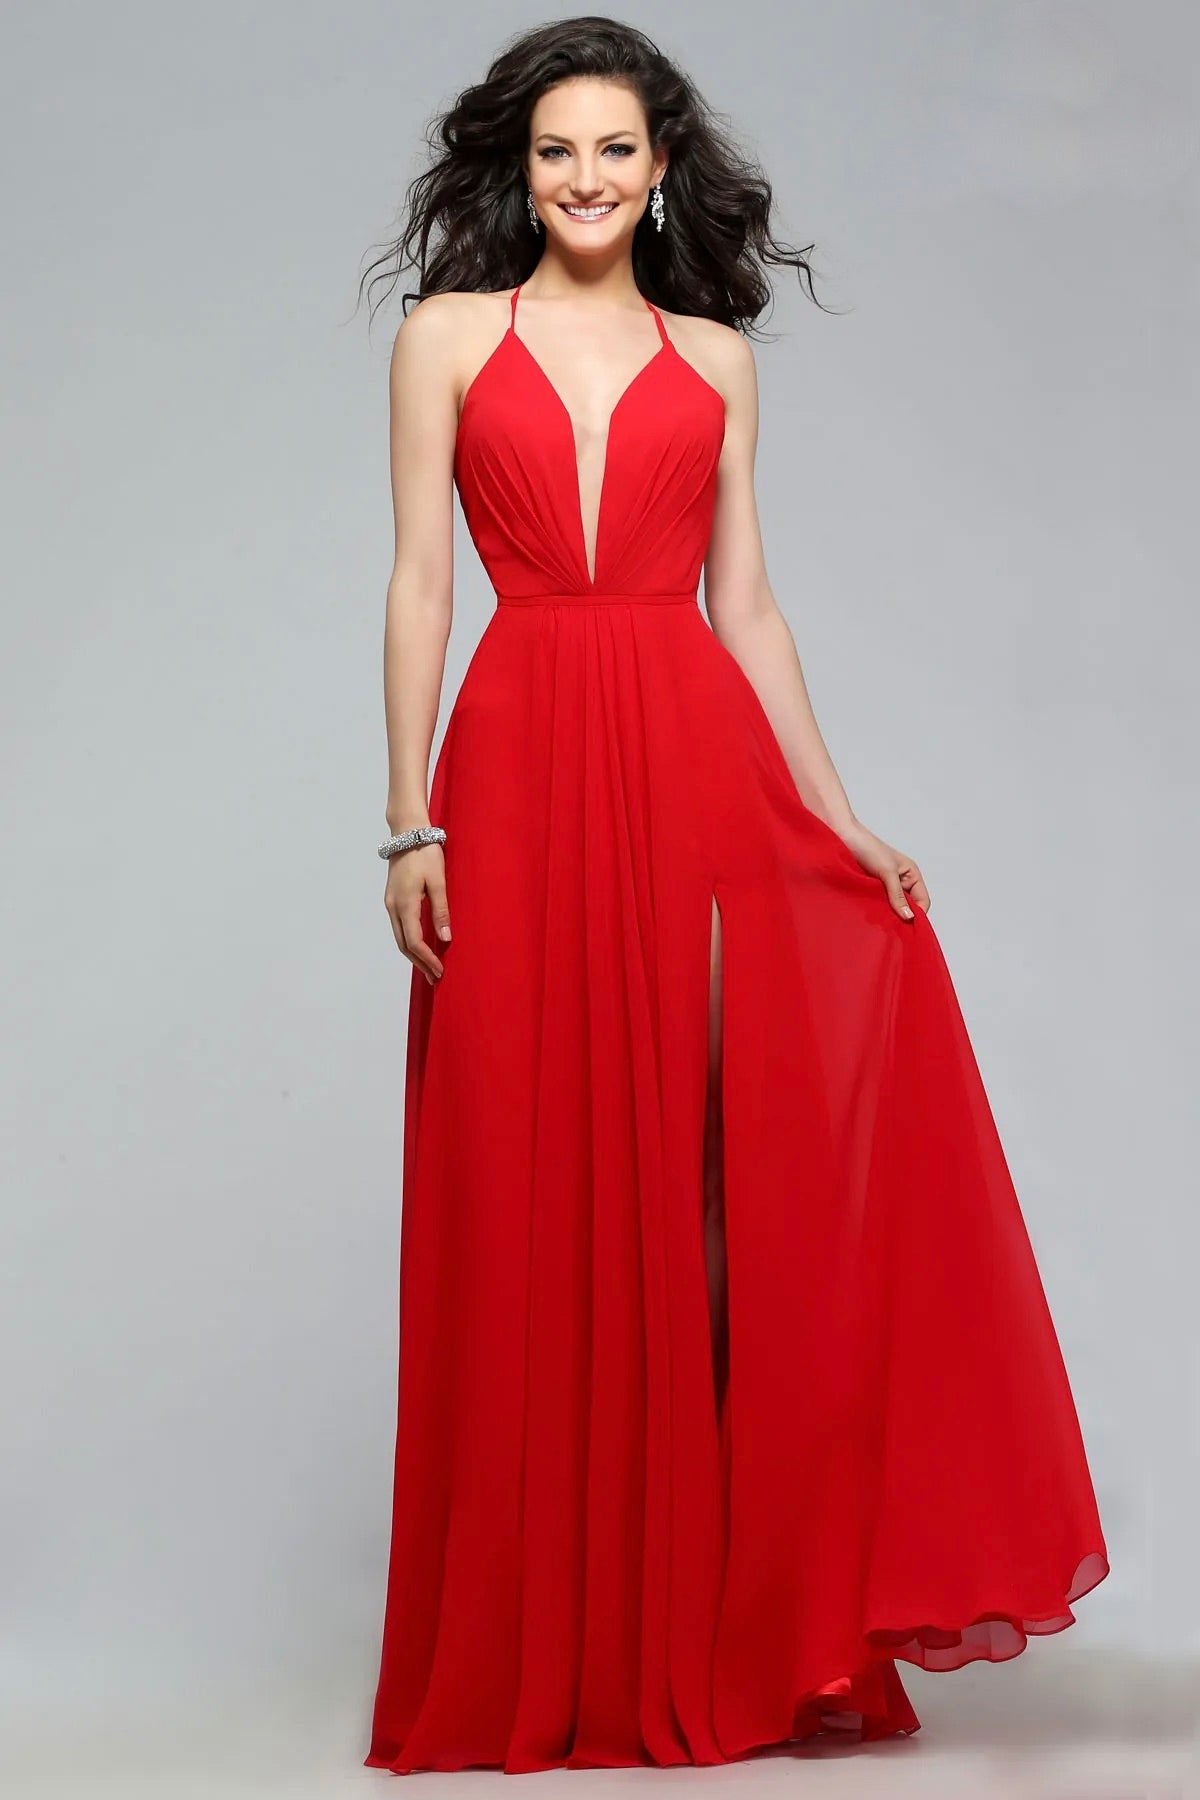 PG Red A-Line Evening Gown